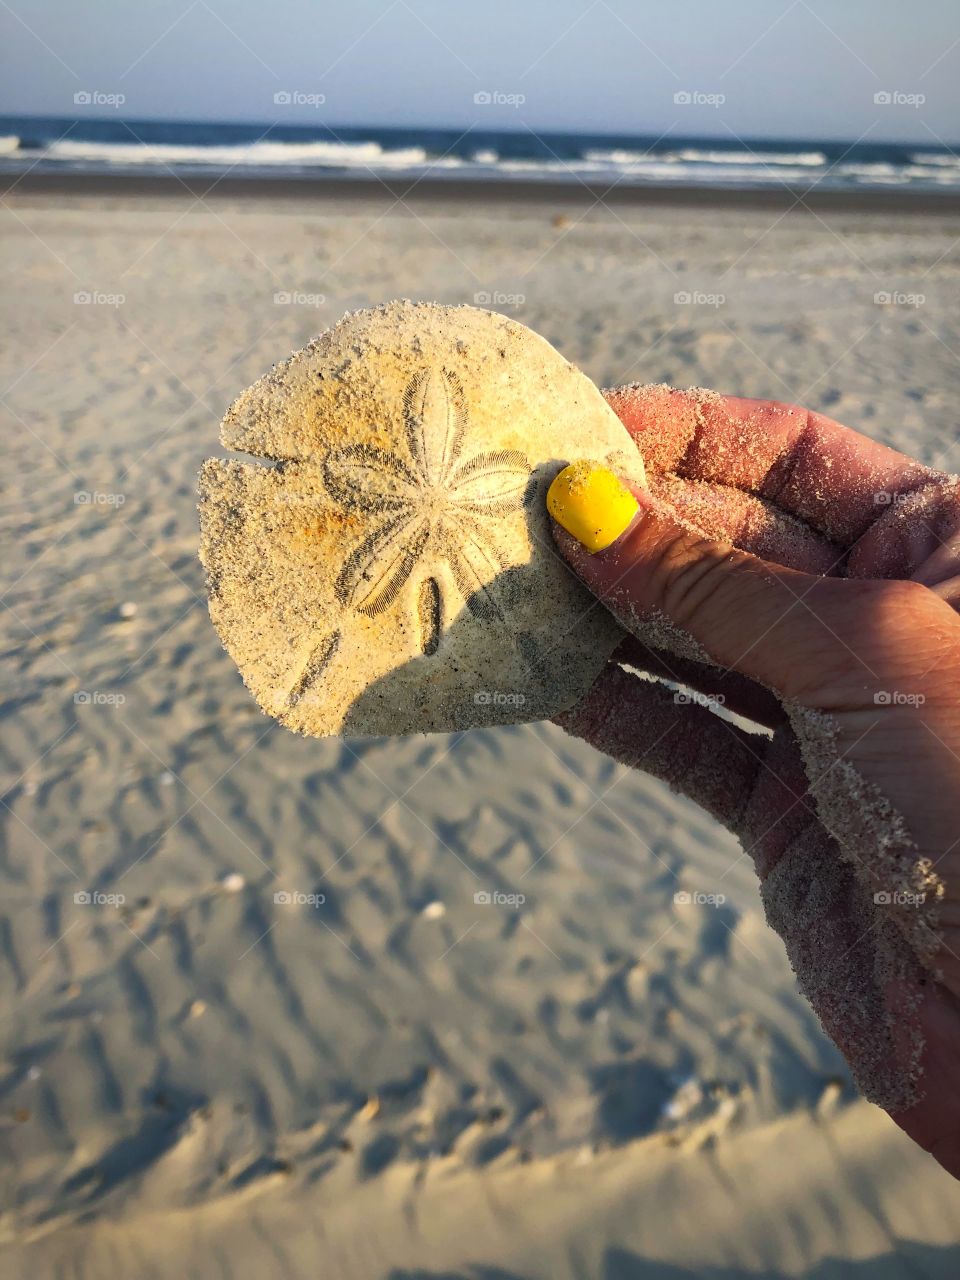 A hobby that never gets old shelling! Especially searching for sand dollars!!!